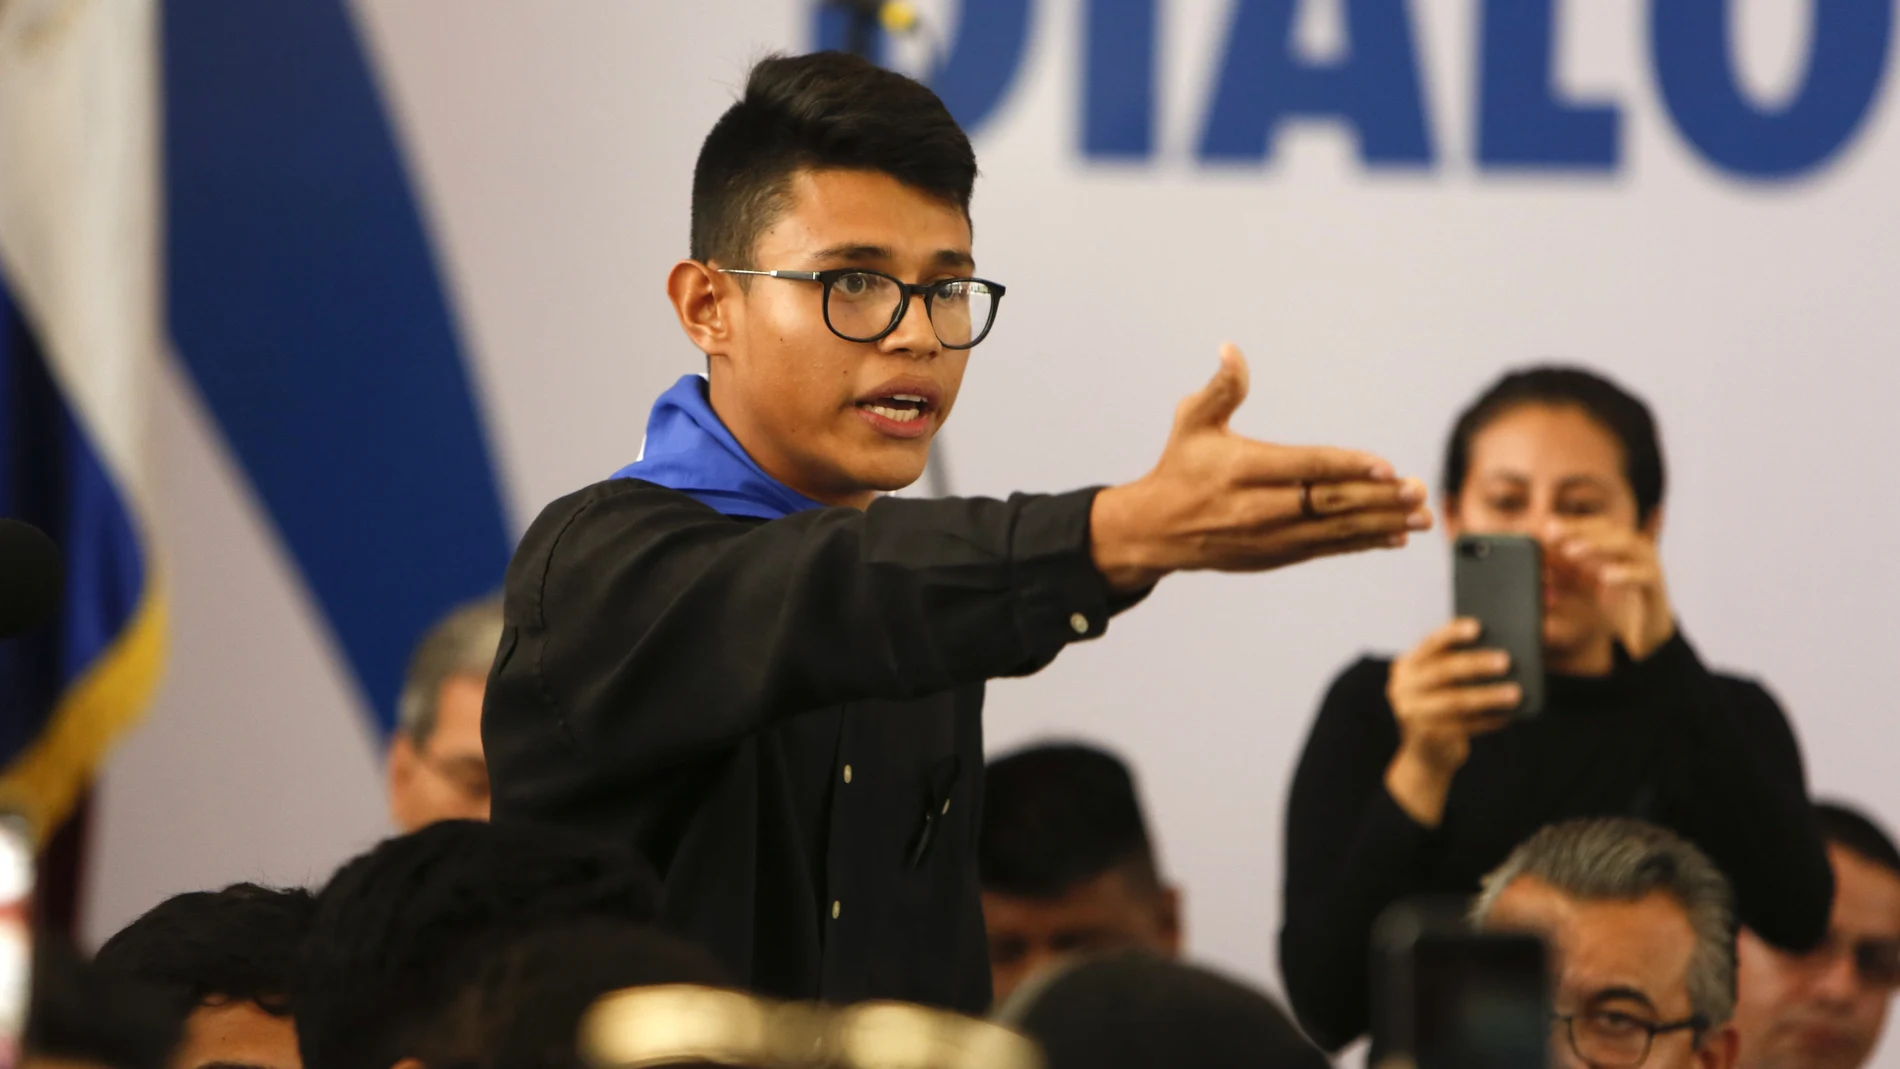 CORRECTS THAT LESTHER ALEMAN IS NOT A PRESIDENTIAL HOPEFUL BUT AN OPPOSITION FIGURE - FILE - In this May 16, 2018 file photo, student representative Lesther Aleman interrupts Nicaraguan President Daniel Ortega, shouting that he must halt repression during the opening of the national dialogue on the outskirts of Managua, Nicaragua. Among the opposition figures in Nicaragua who have not been arrested is Aleman, the then-student leader who famously in 2018 urged Ortega to resign during talks aimed at resolving the country's social crisis. Aleman remains in Nicaragua, but keeps his location secret for safety reasons. (AP Photo/Alfredo Zuniga, File)